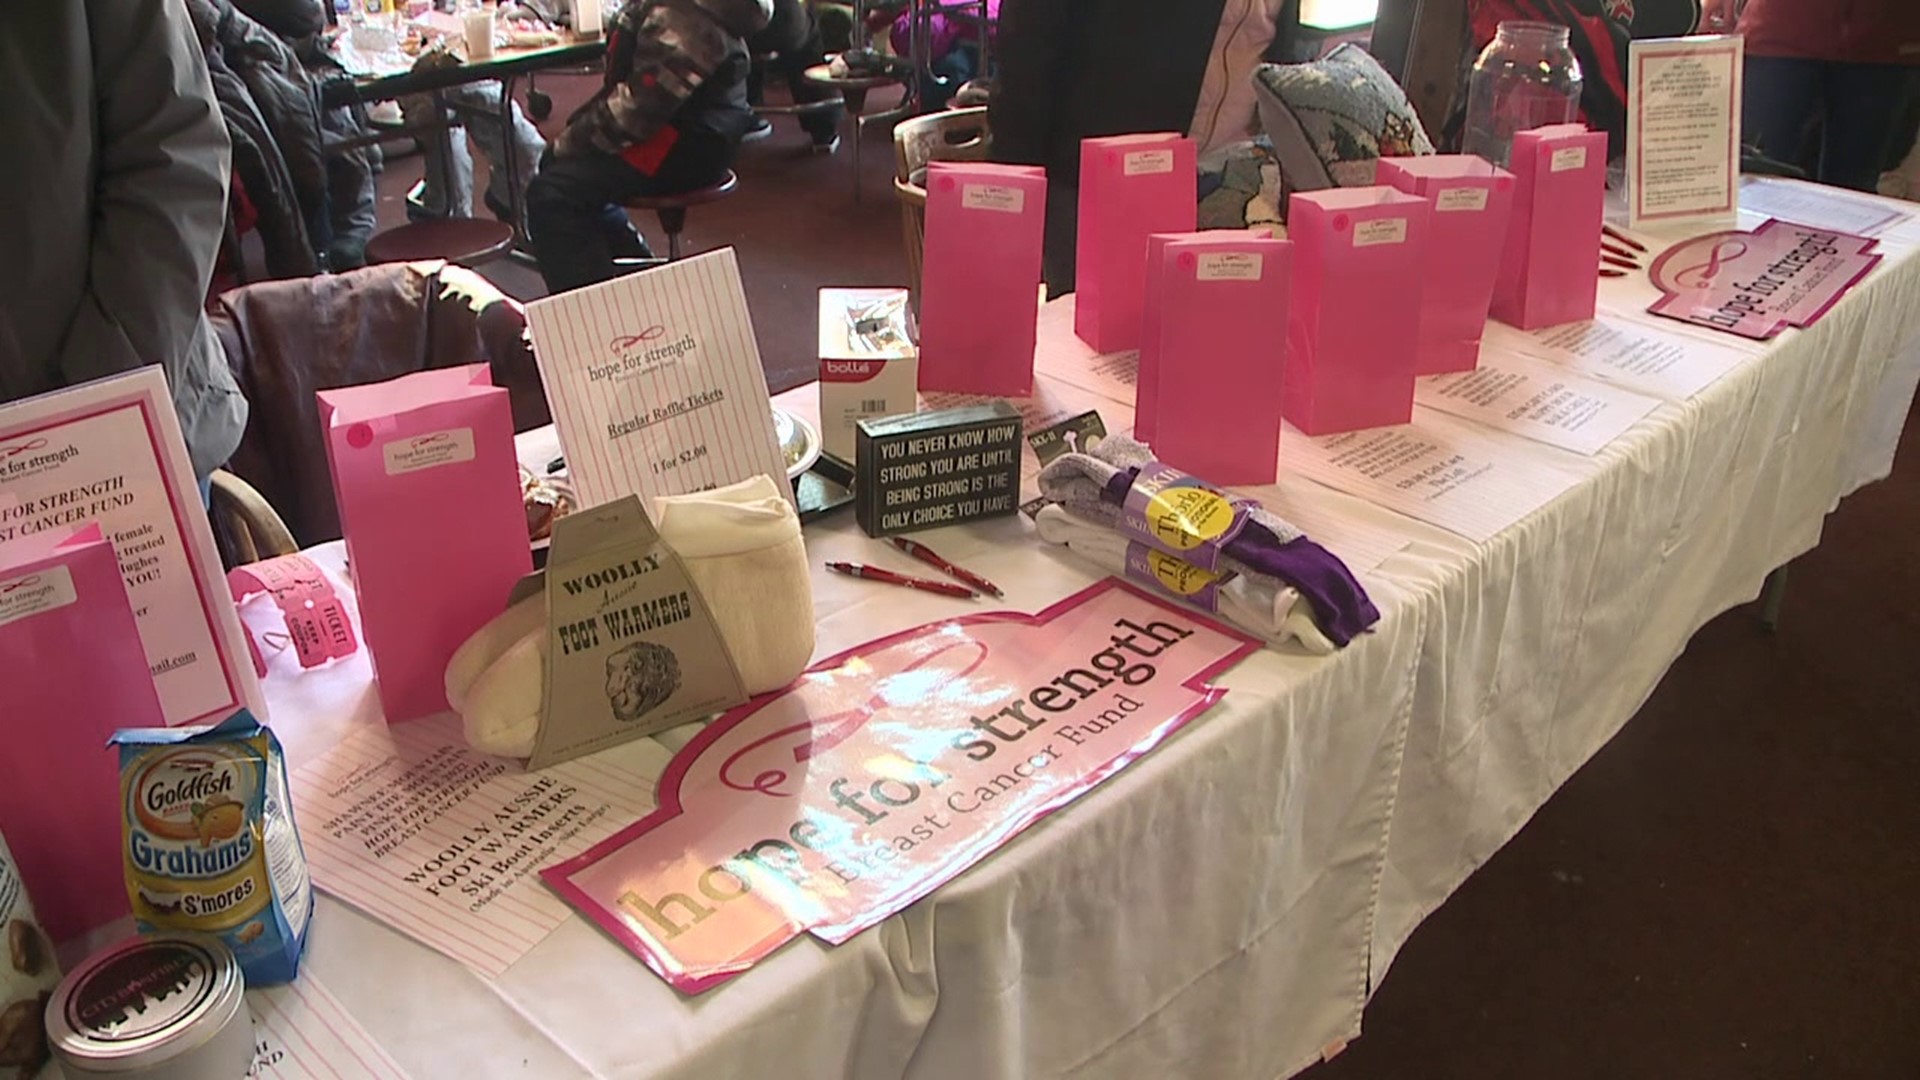 Shawnee Mountain Ski Area hosted their annual "Paint the Mountain Pink" event on Saturday.